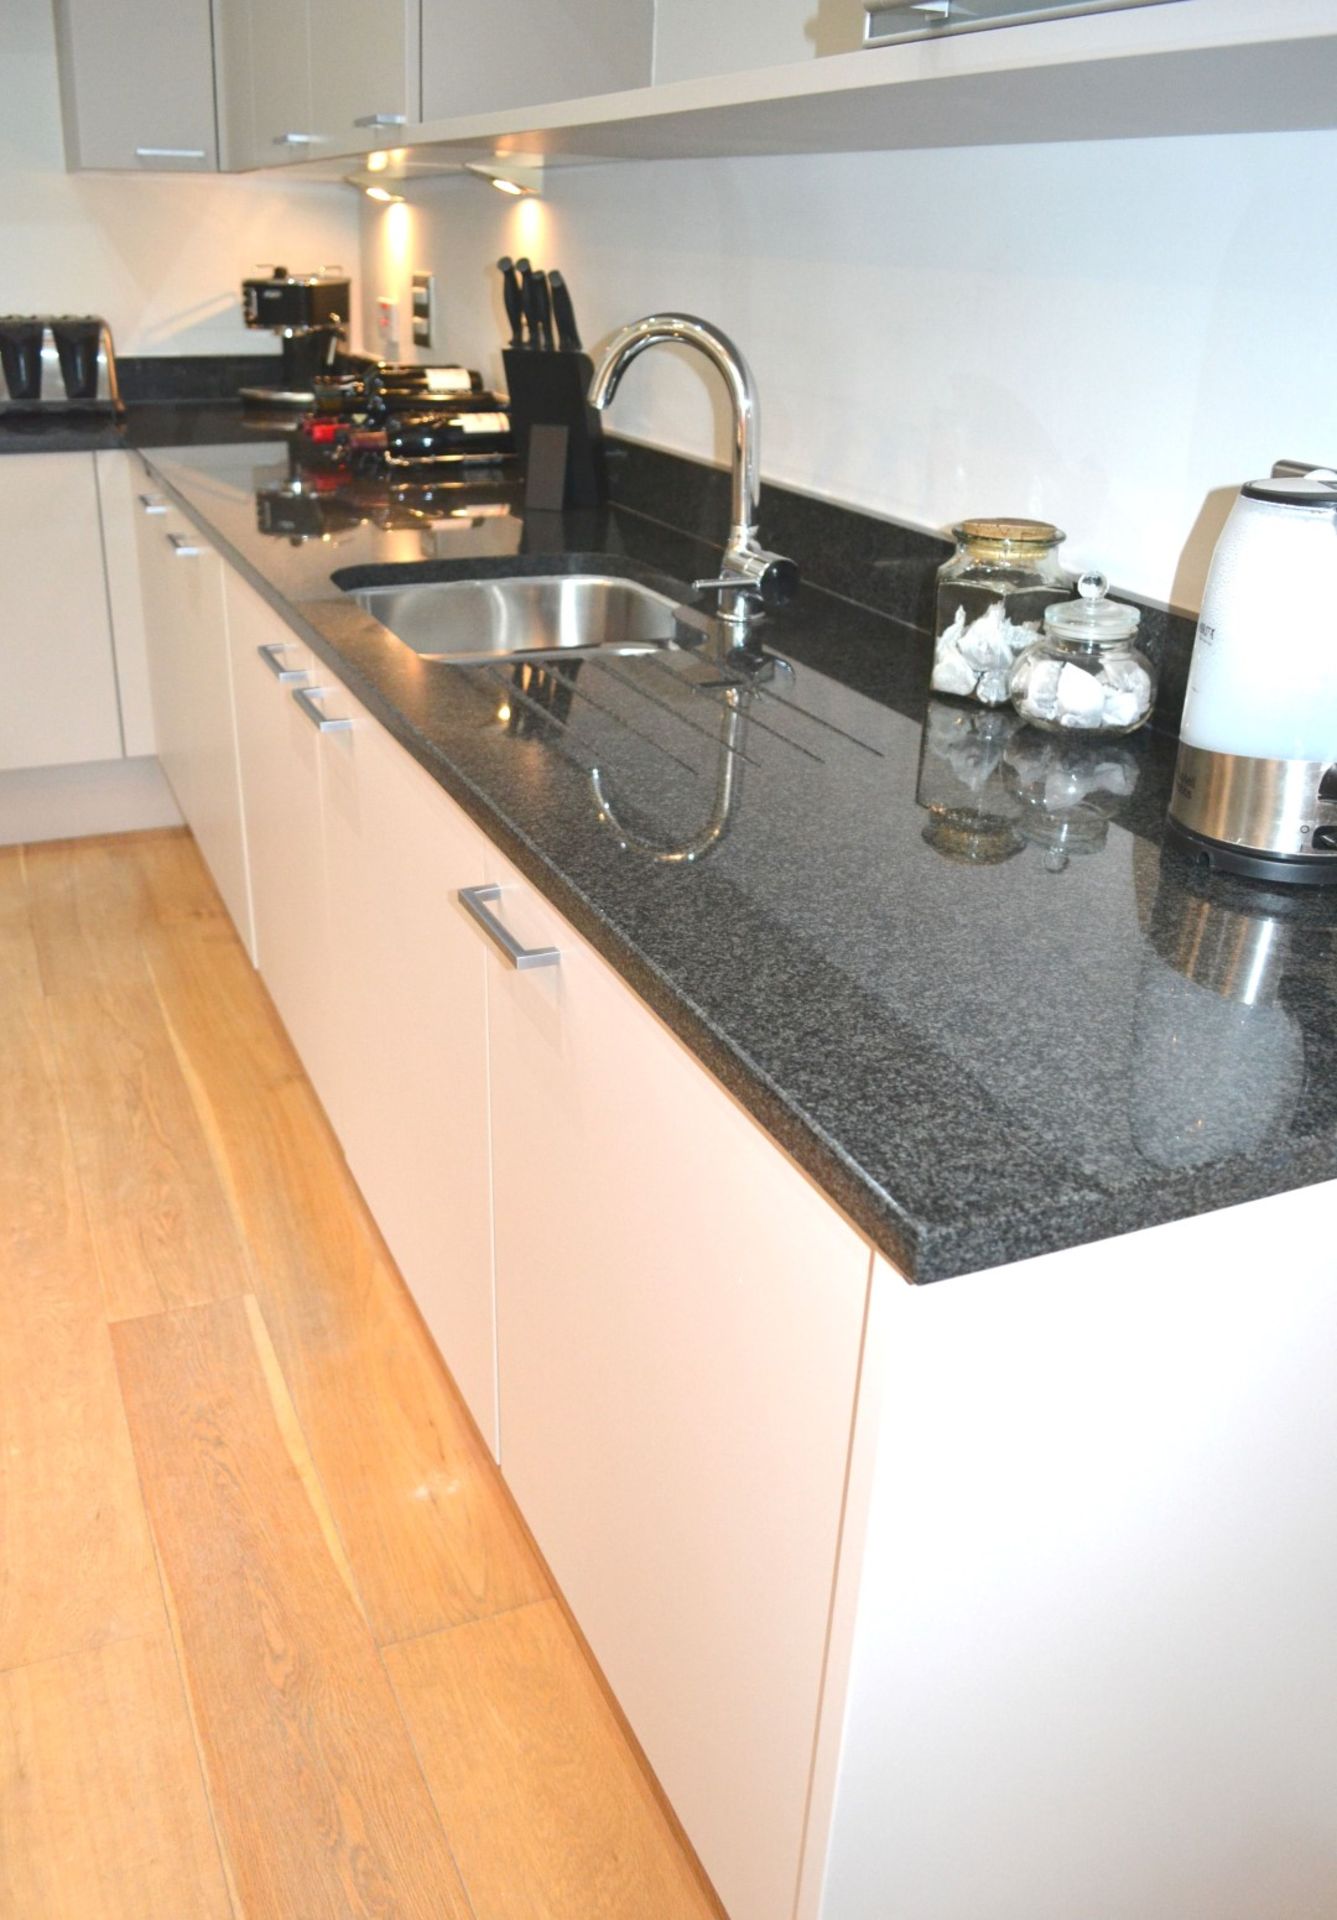 1 x Stunning Poggenpohl Kitchen With Black Granite Worktops and Miele and Siemens Appliances - In - Image 22 of 67